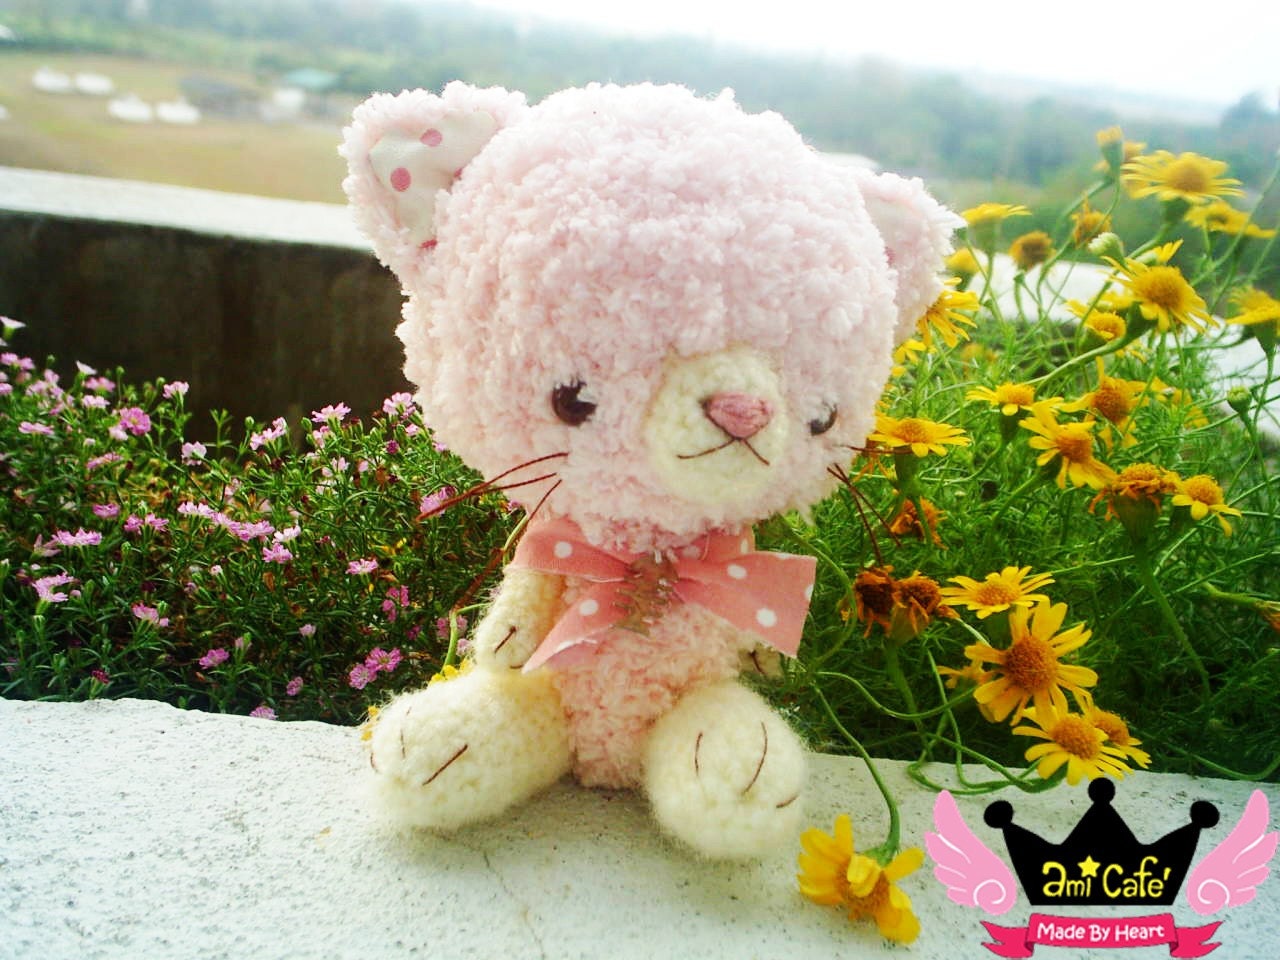 Pixie - Cotton Candy Amigurumi Kitty by Ami Cafe' - READY TO SHIP